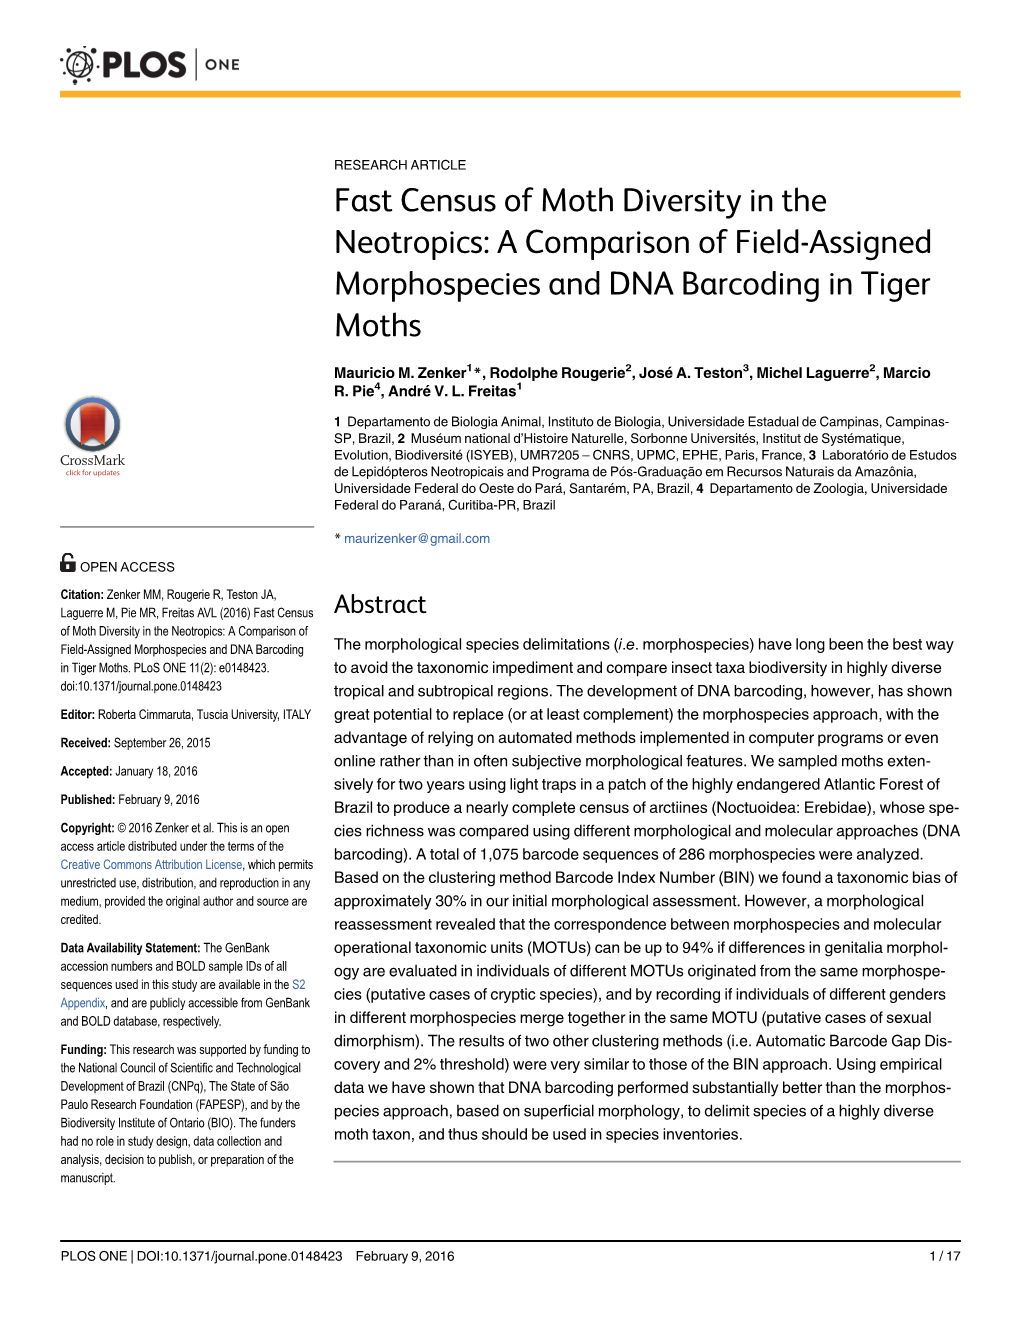 Fast Census of Moth Diversity in the Neotropics: a Comparison of Field-Assigned Morphospecies and DNA Barcoding in Tiger Moths